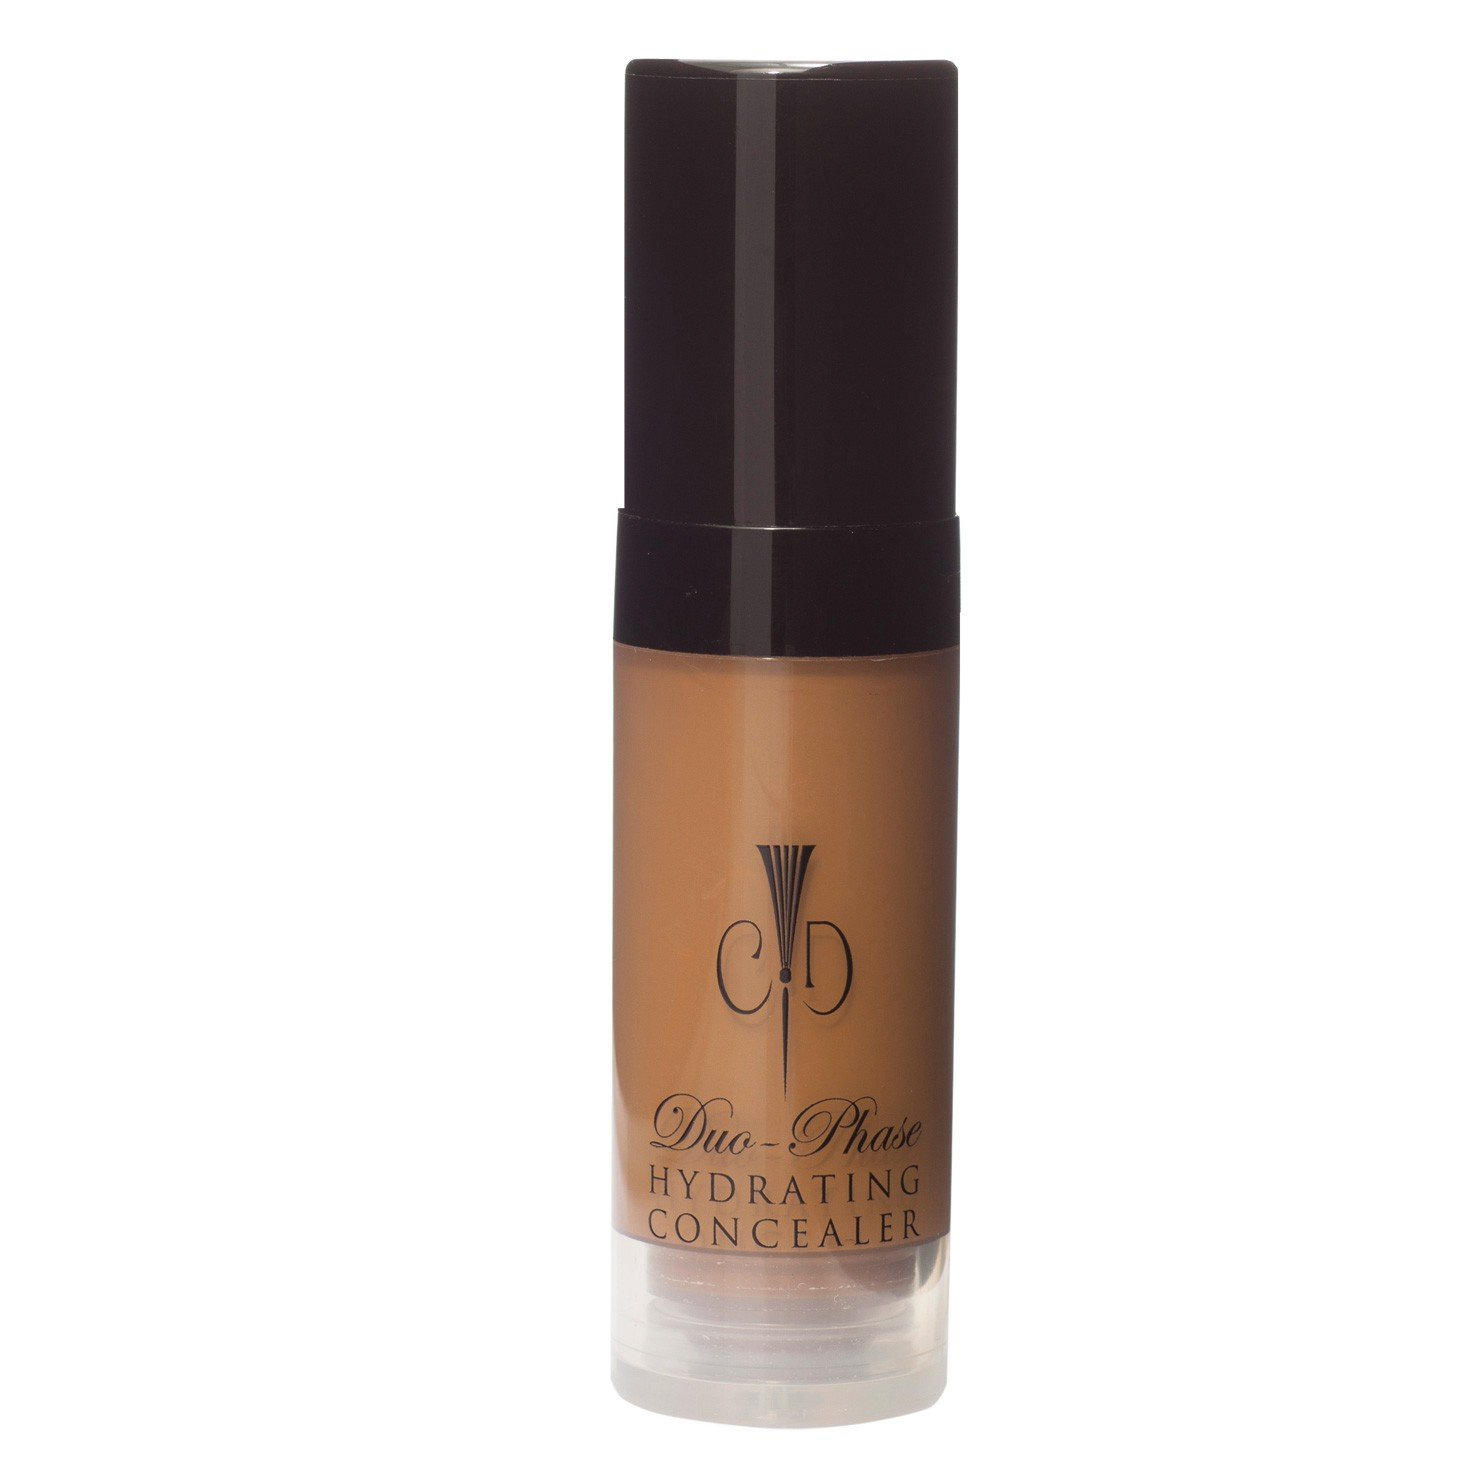 Christopher Drummond Duo-Phase Hydrating Concealer Dark Mini